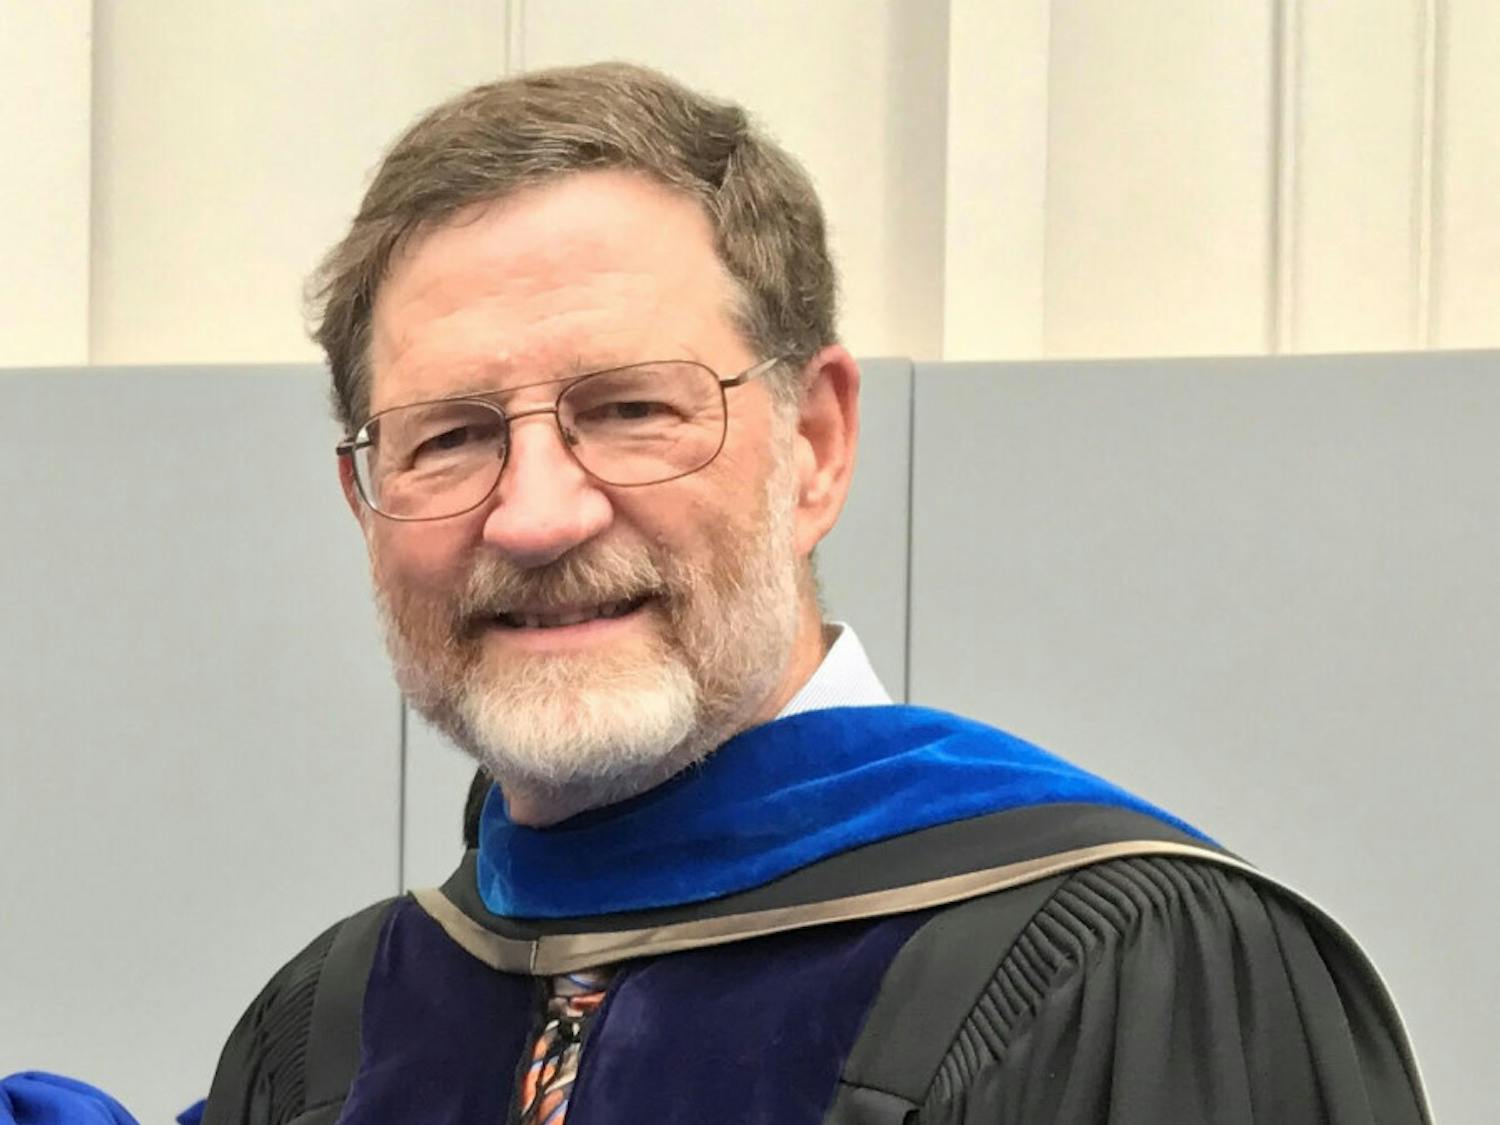 Richard Yost, 66, pictured in April 2019 at a PhD commencement ceremony where he escorted his most recent PhD graduate student.